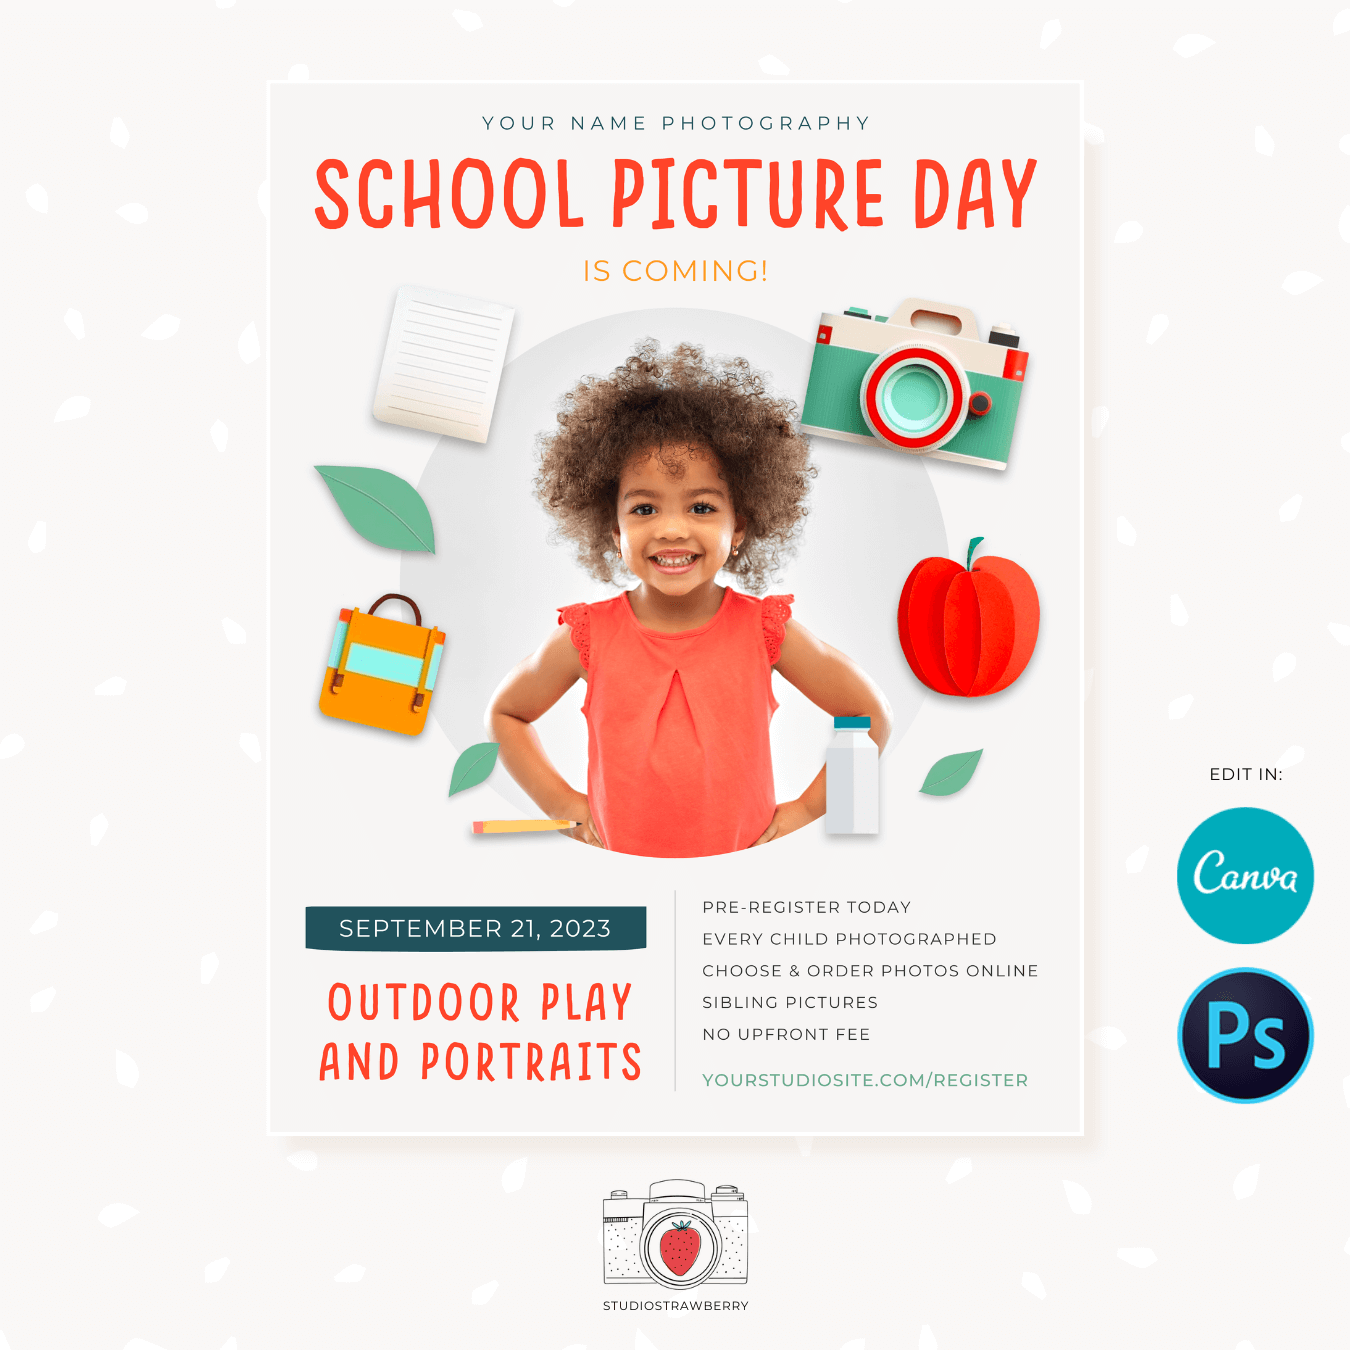 School picture day marketing template for school portrait photographers